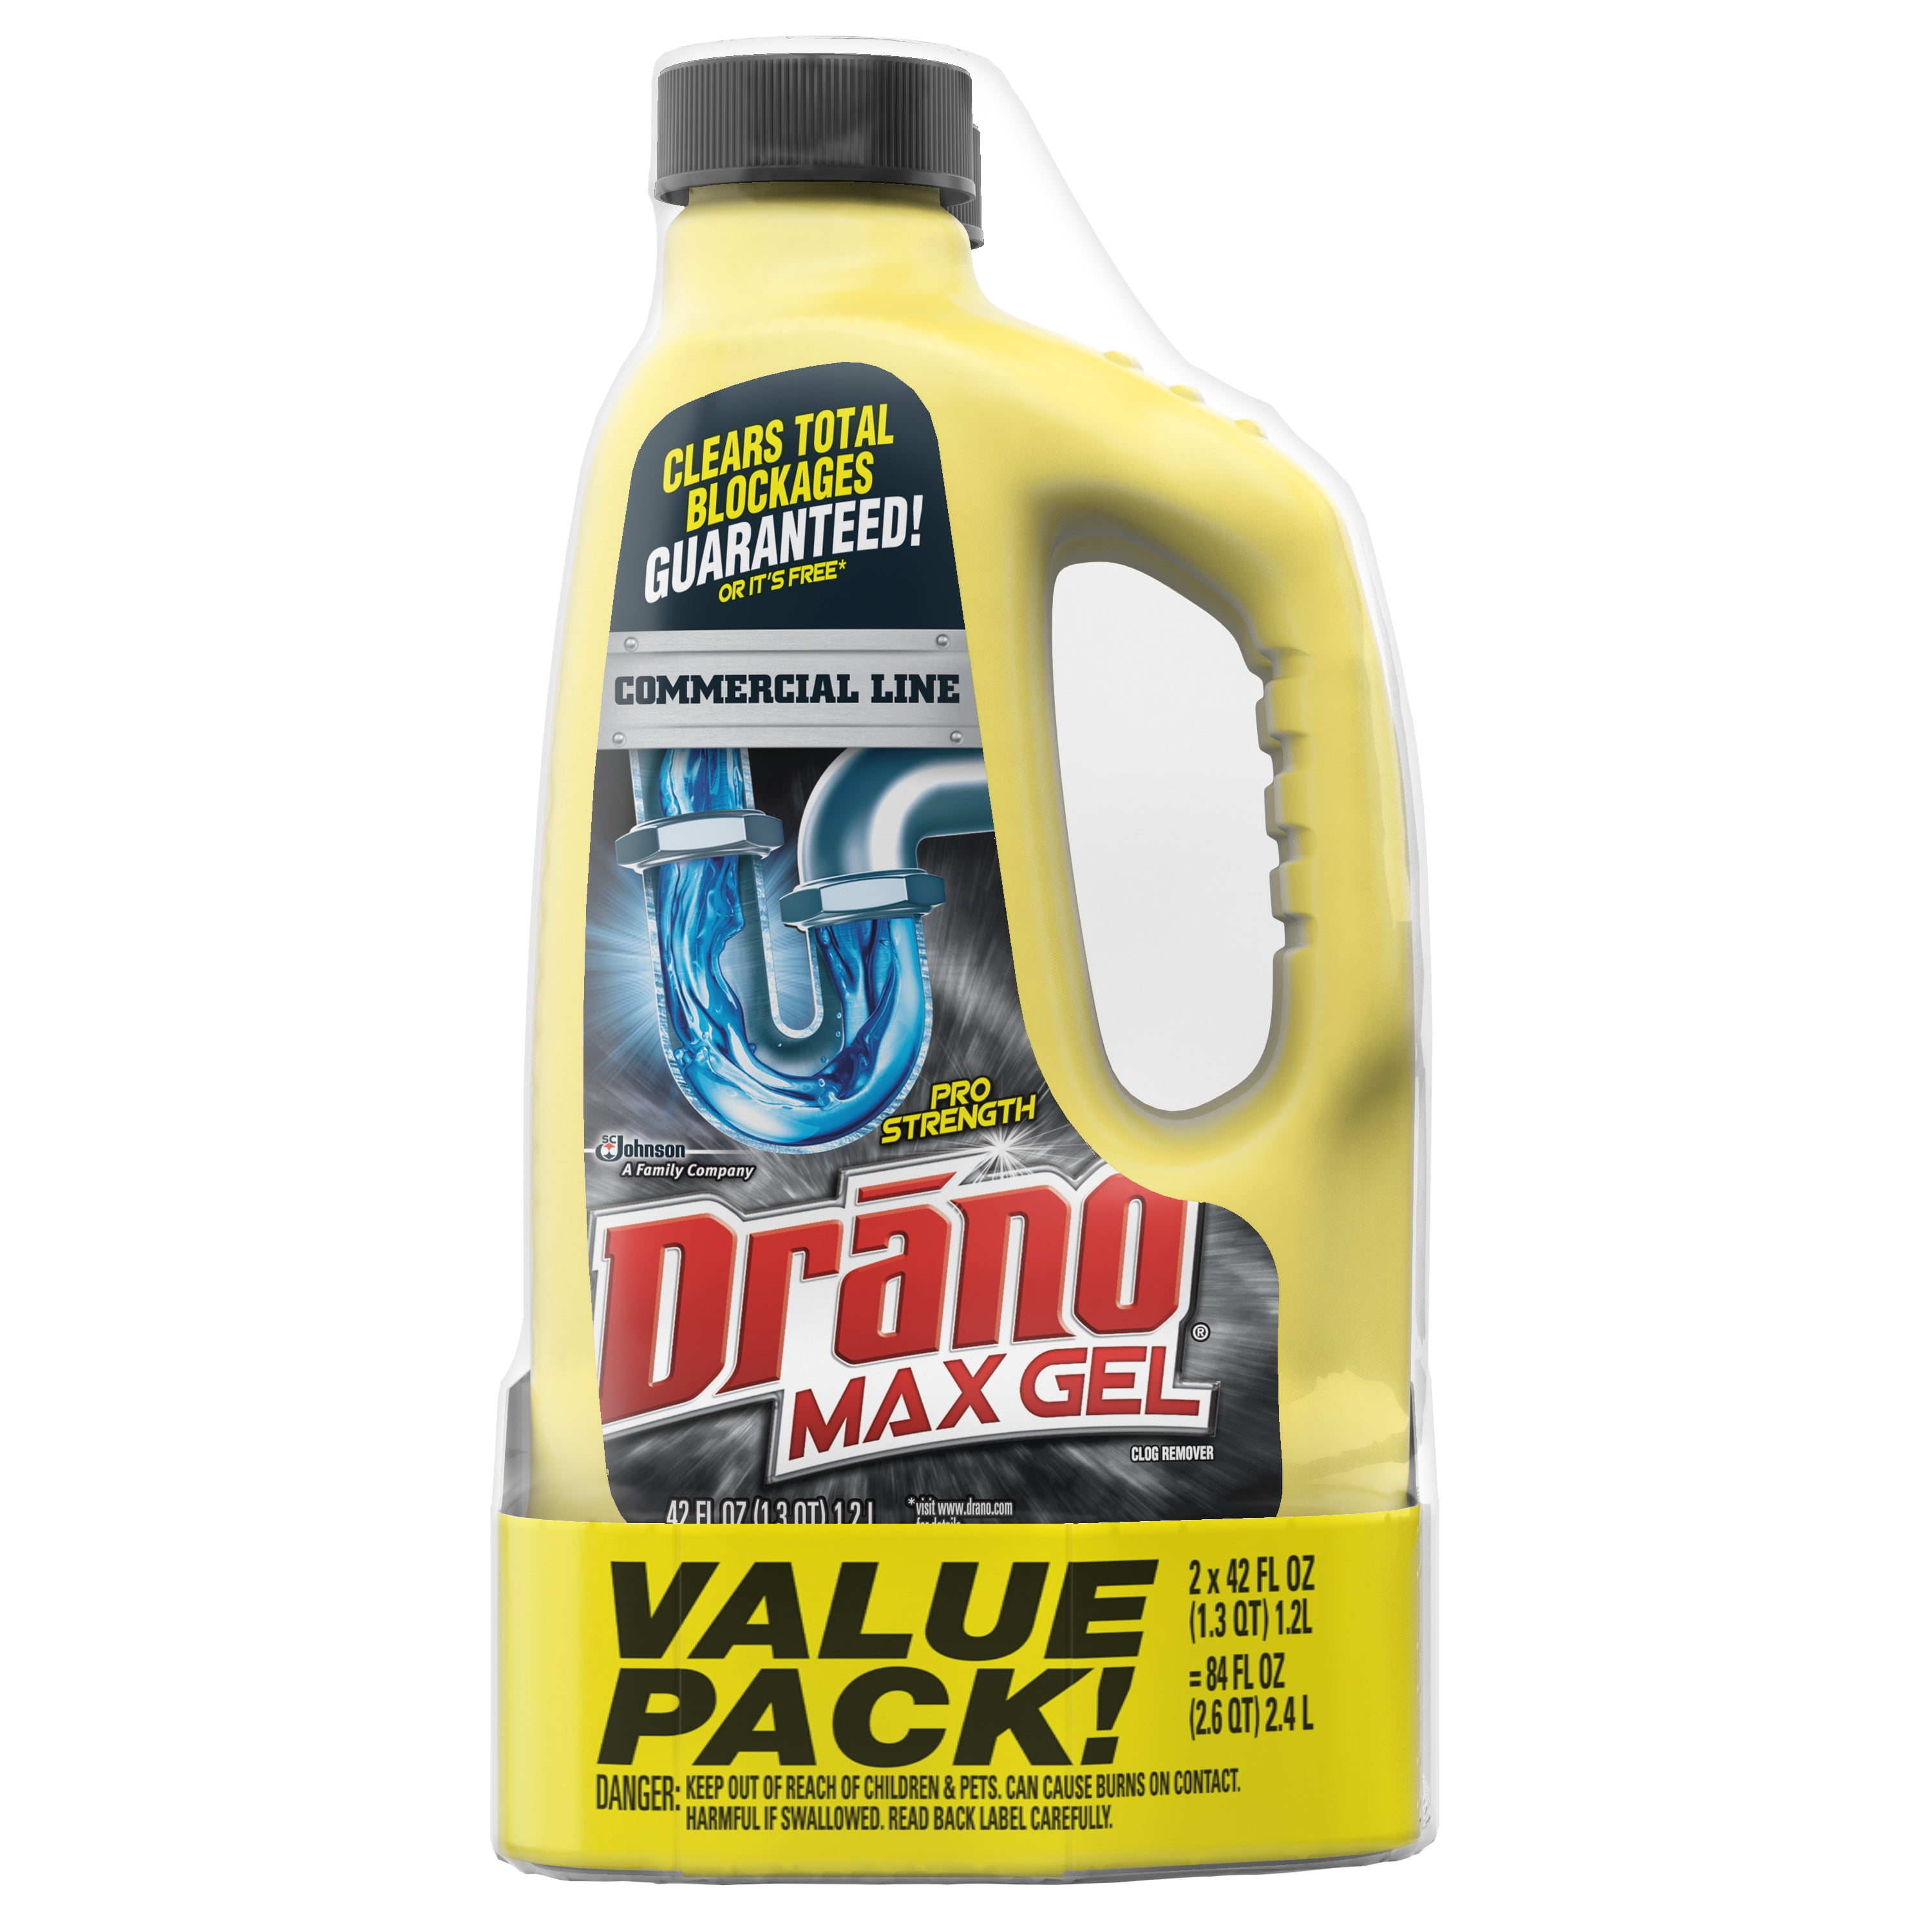 Drano Max Gel Clog Remover Commercial, Can Drano Max Gel Be Used In Bathtub